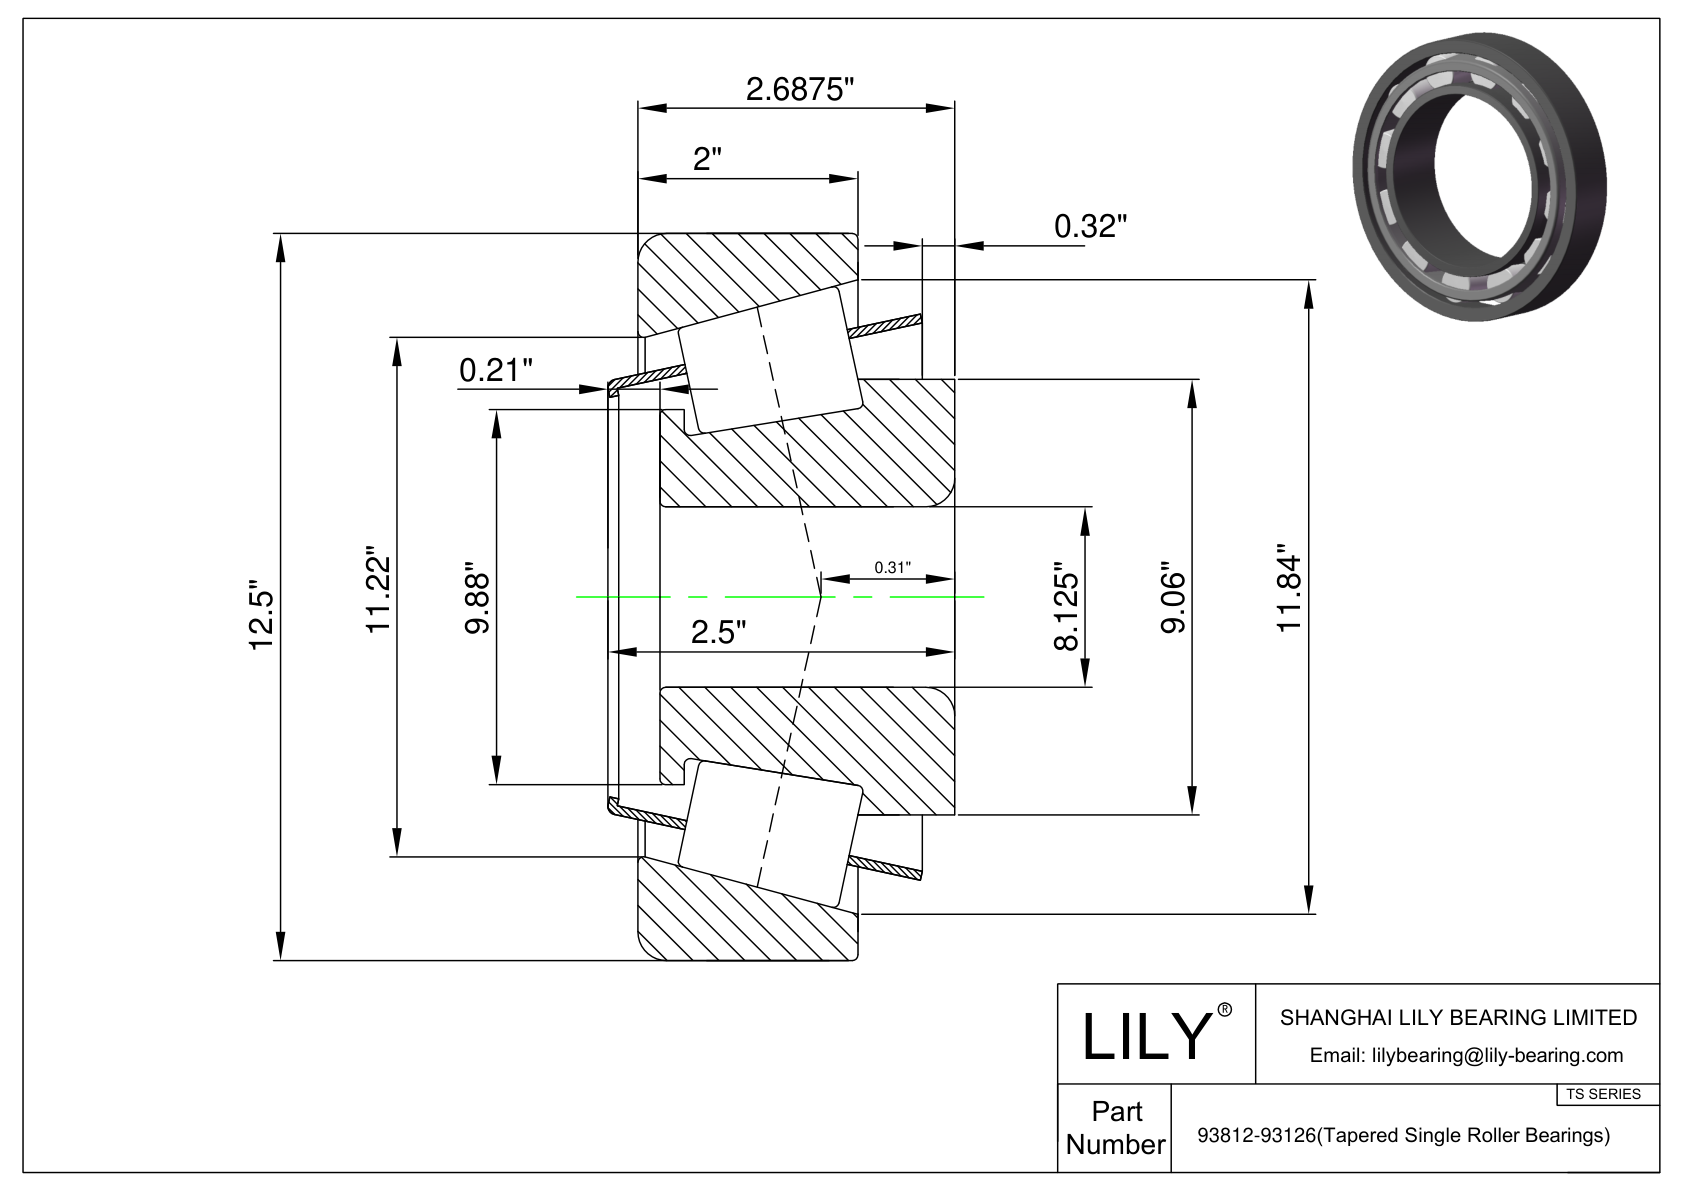 93812-93126 TS (Tapered Single Roller Bearings) (Imperial) cad drawing